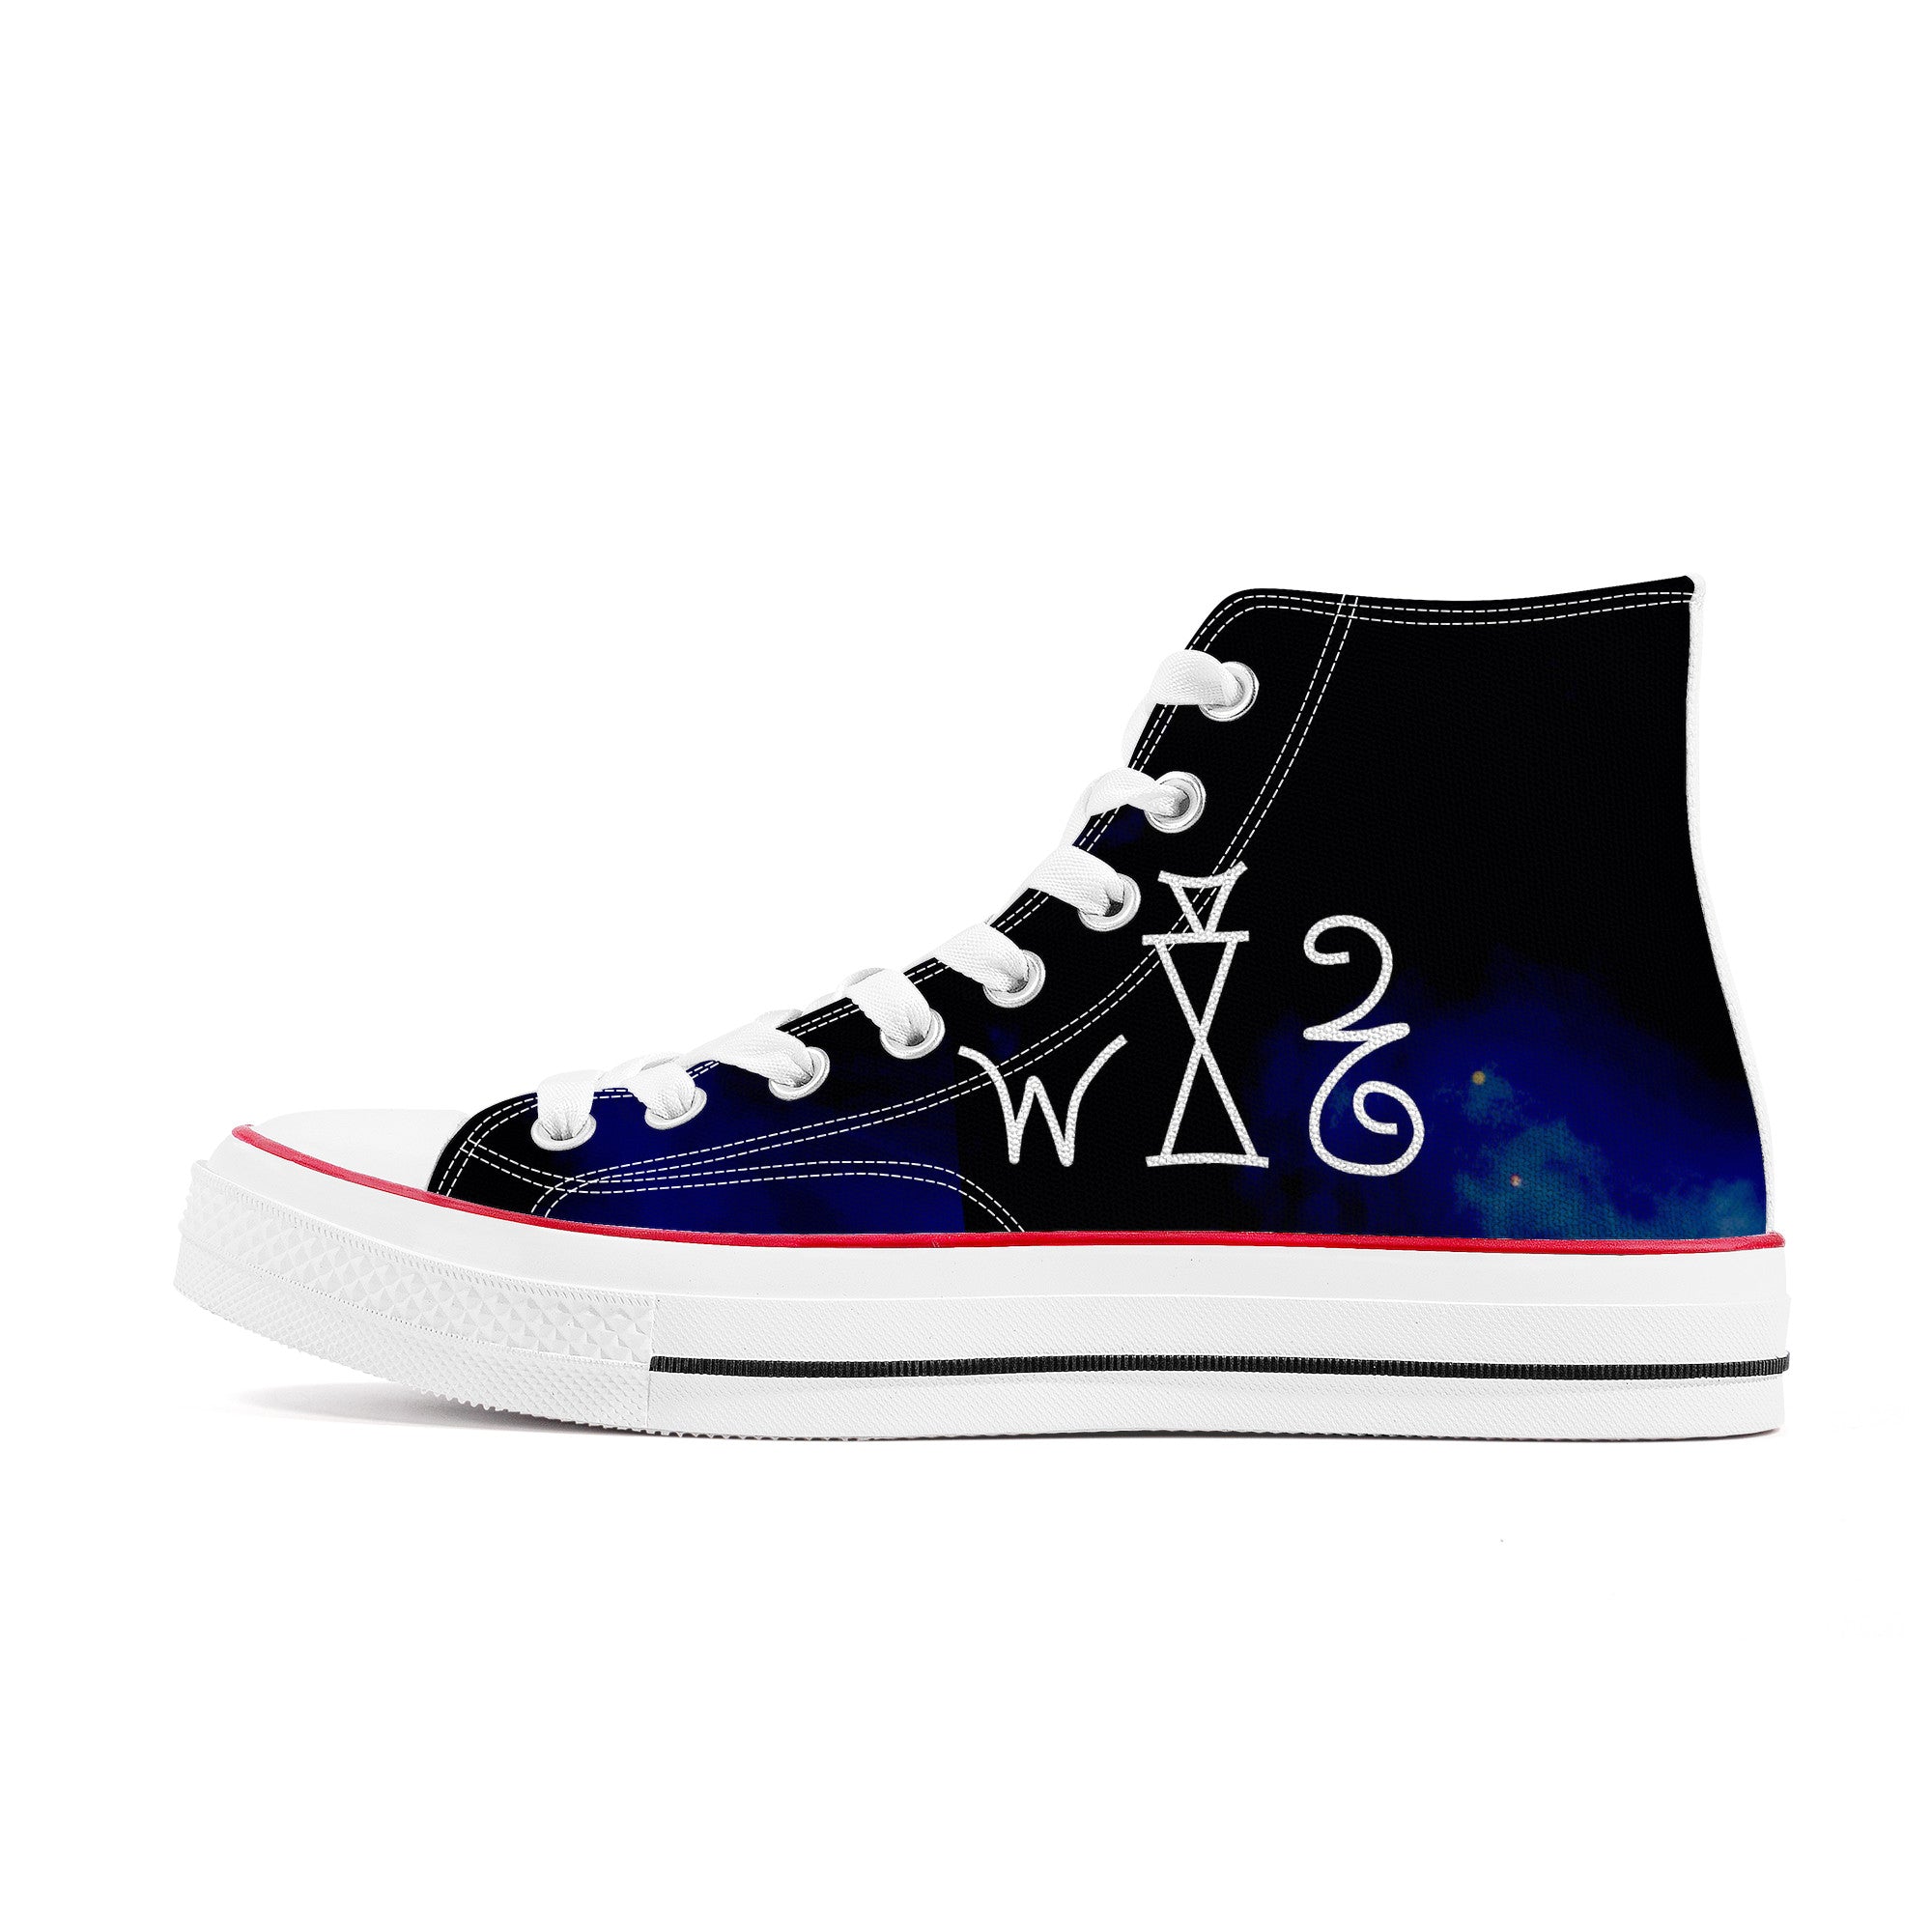 They will teach us | Customized High Top Canvas Shoes - White - Shoe Zero